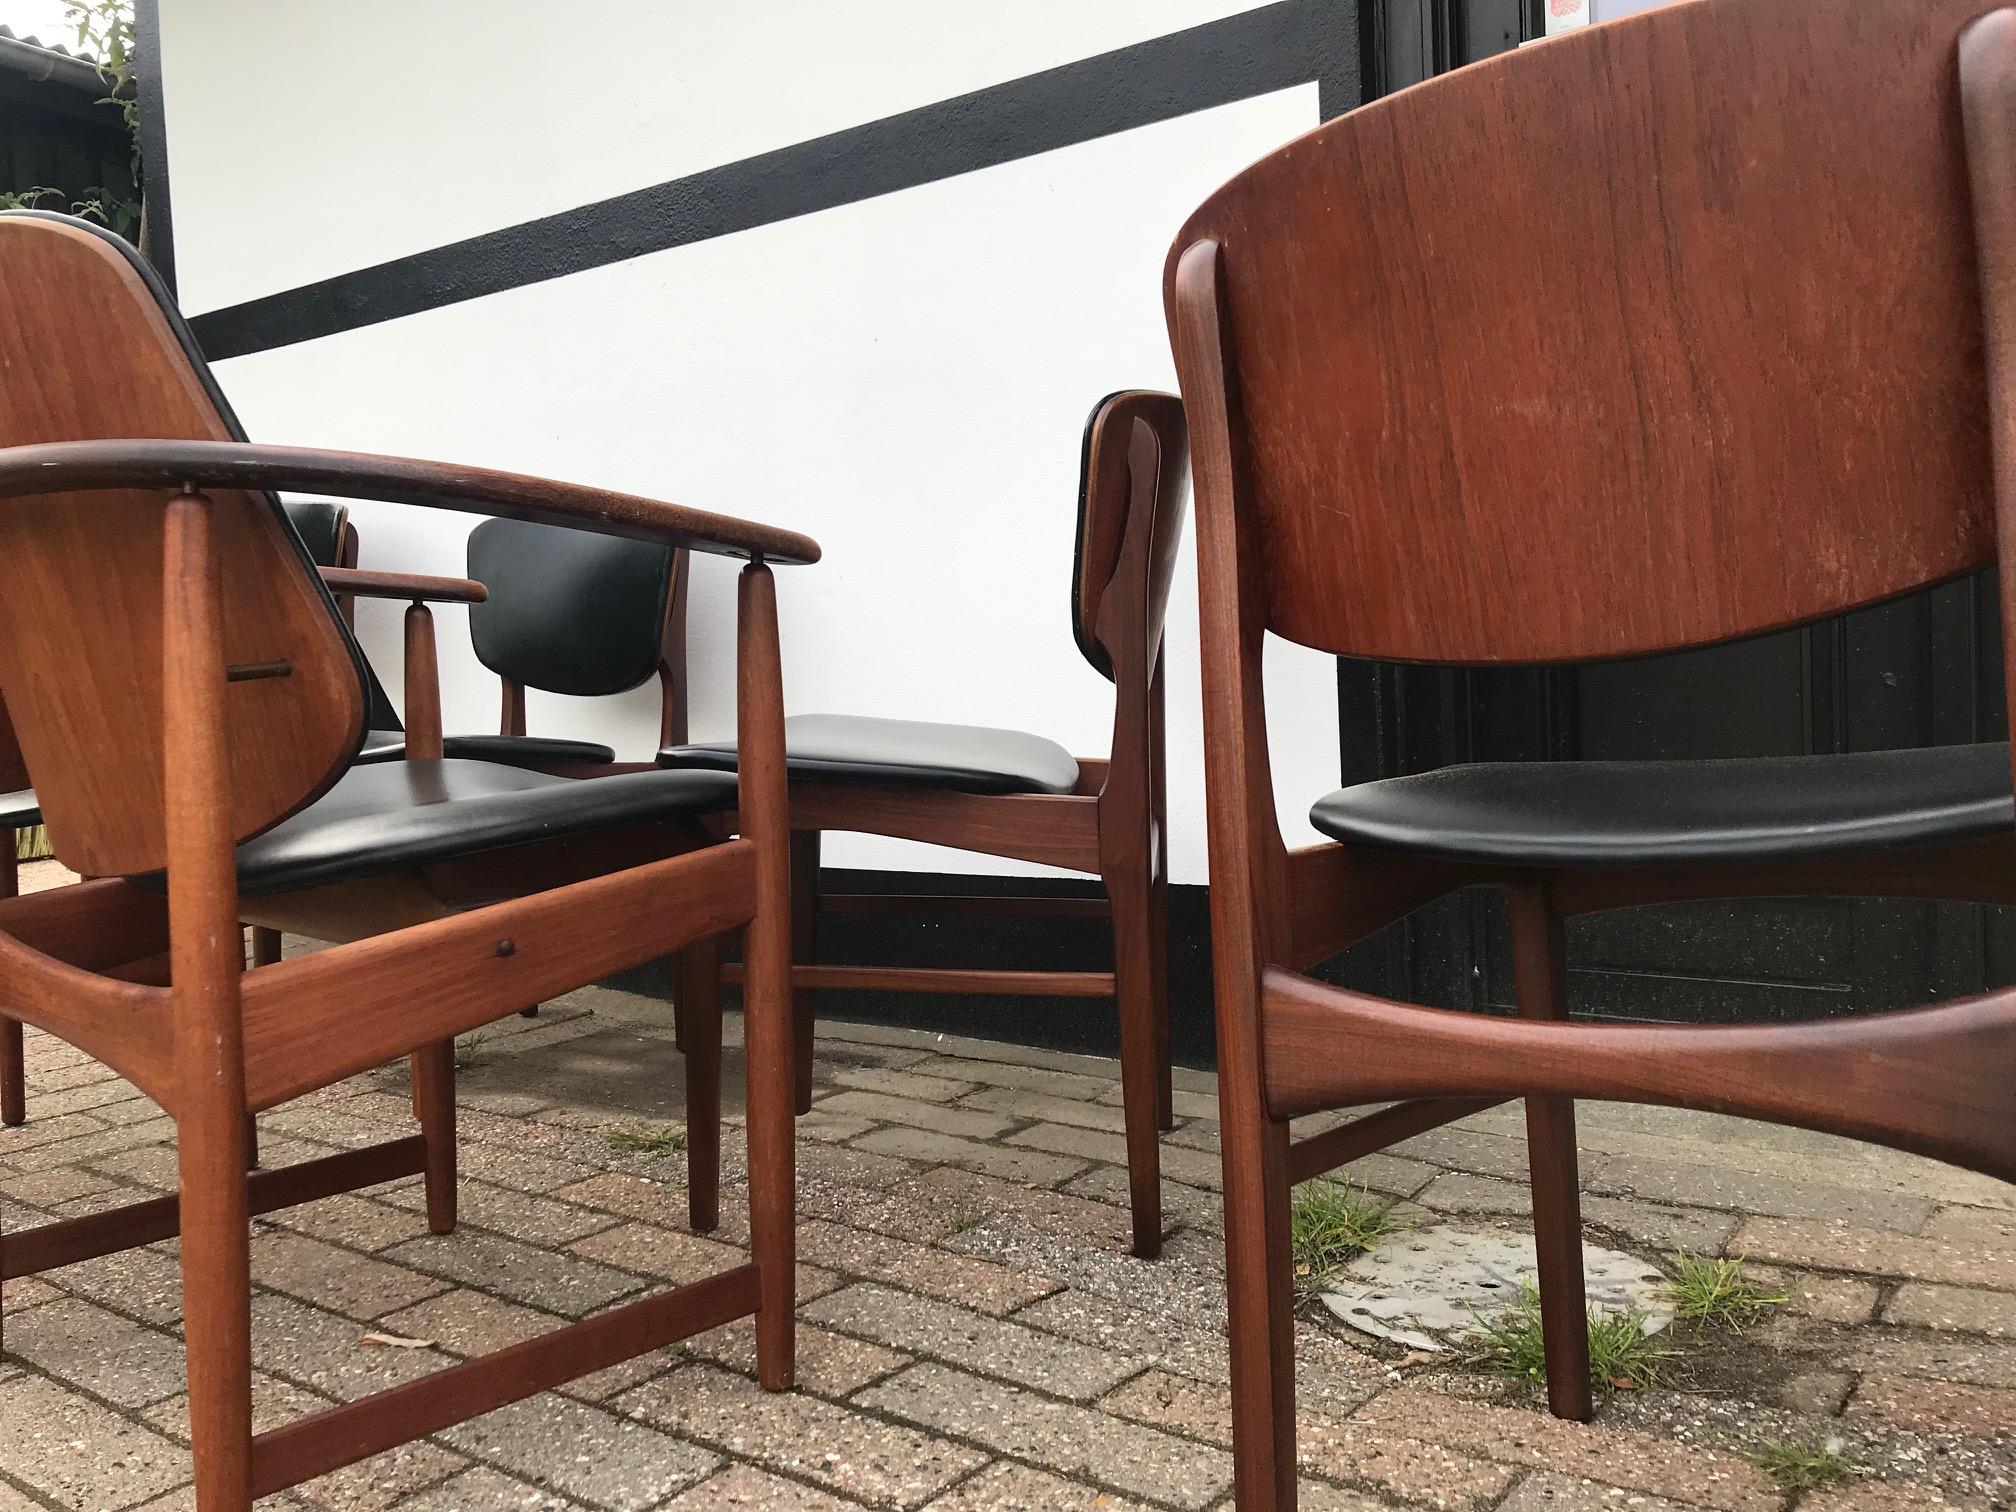 Arne Hovmand Olsen King and Queen Dining Chairs in Teak, Jutex 1950s, Set of 6 For Sale 2